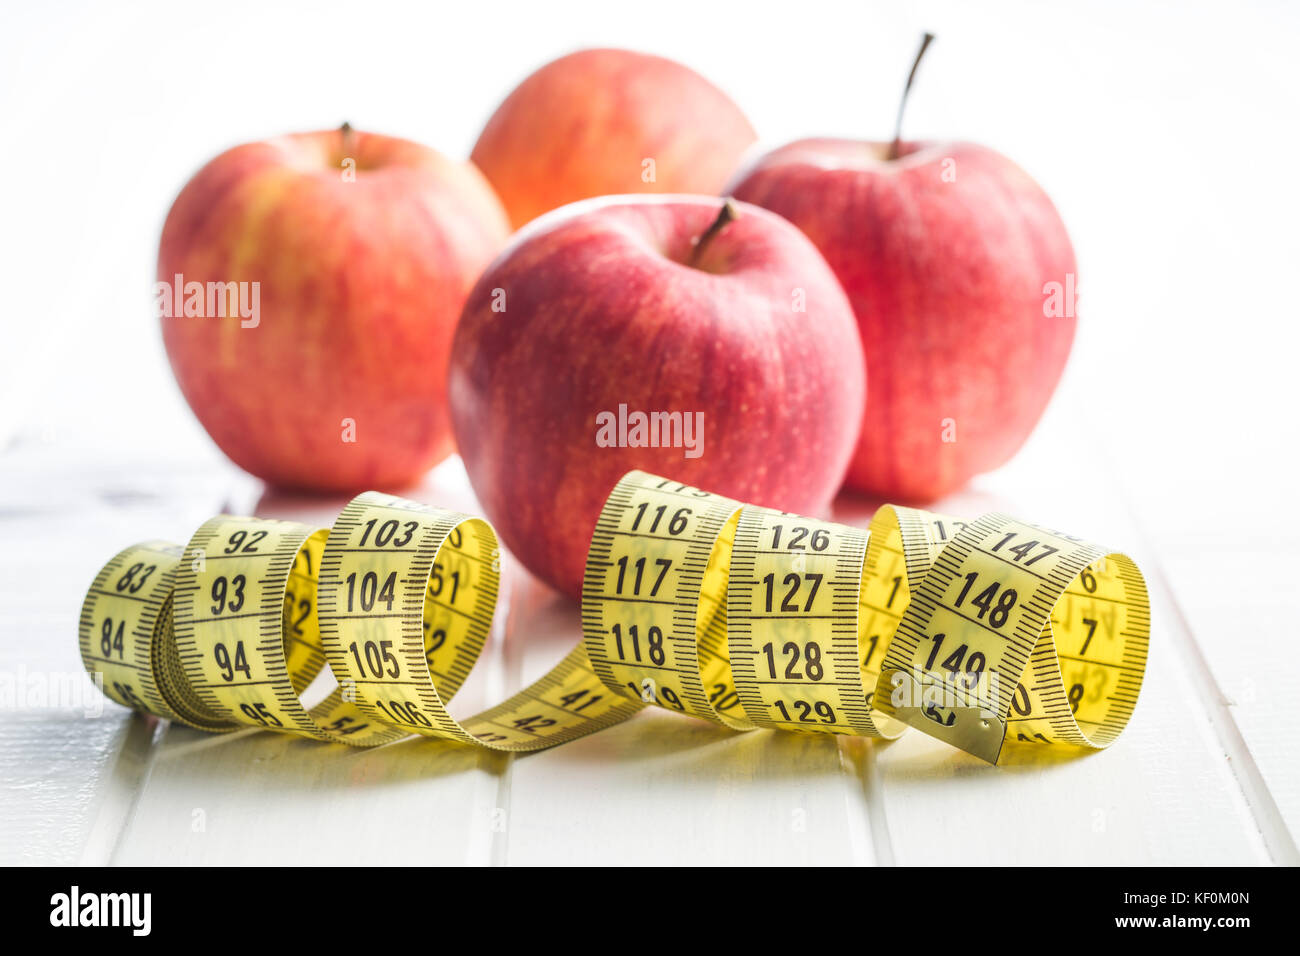 Red apple and measuring tape. Diet concept. Stock Photo